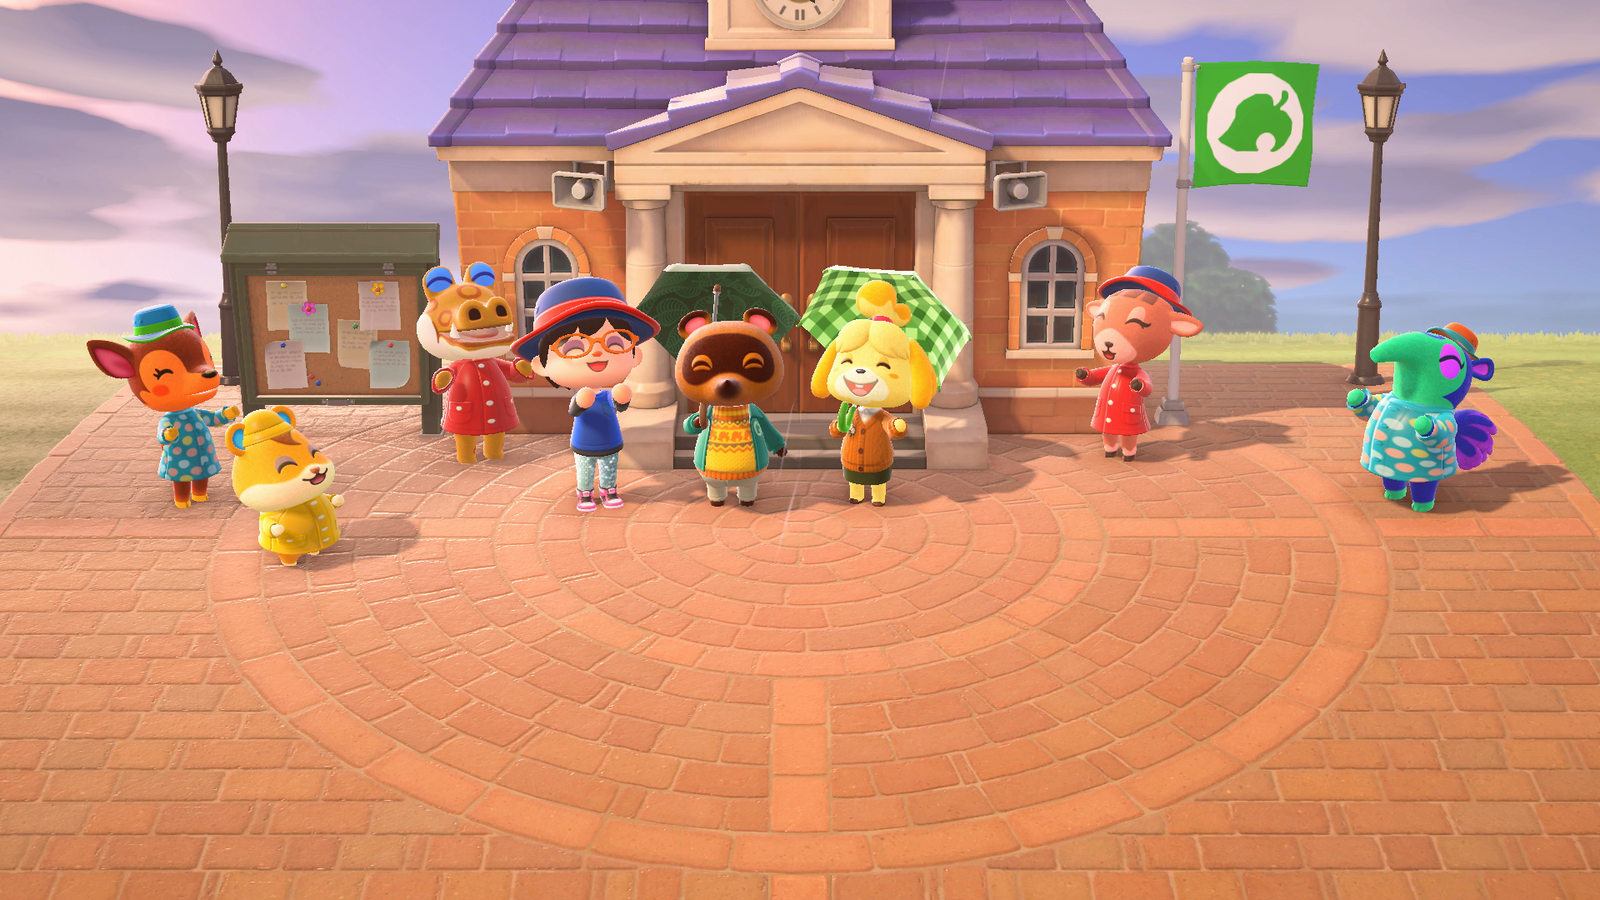 A player with Tom Nook, Isabelle, and their villagers celebrating outside the Town Hall in Animal Crossing: New Horizons.